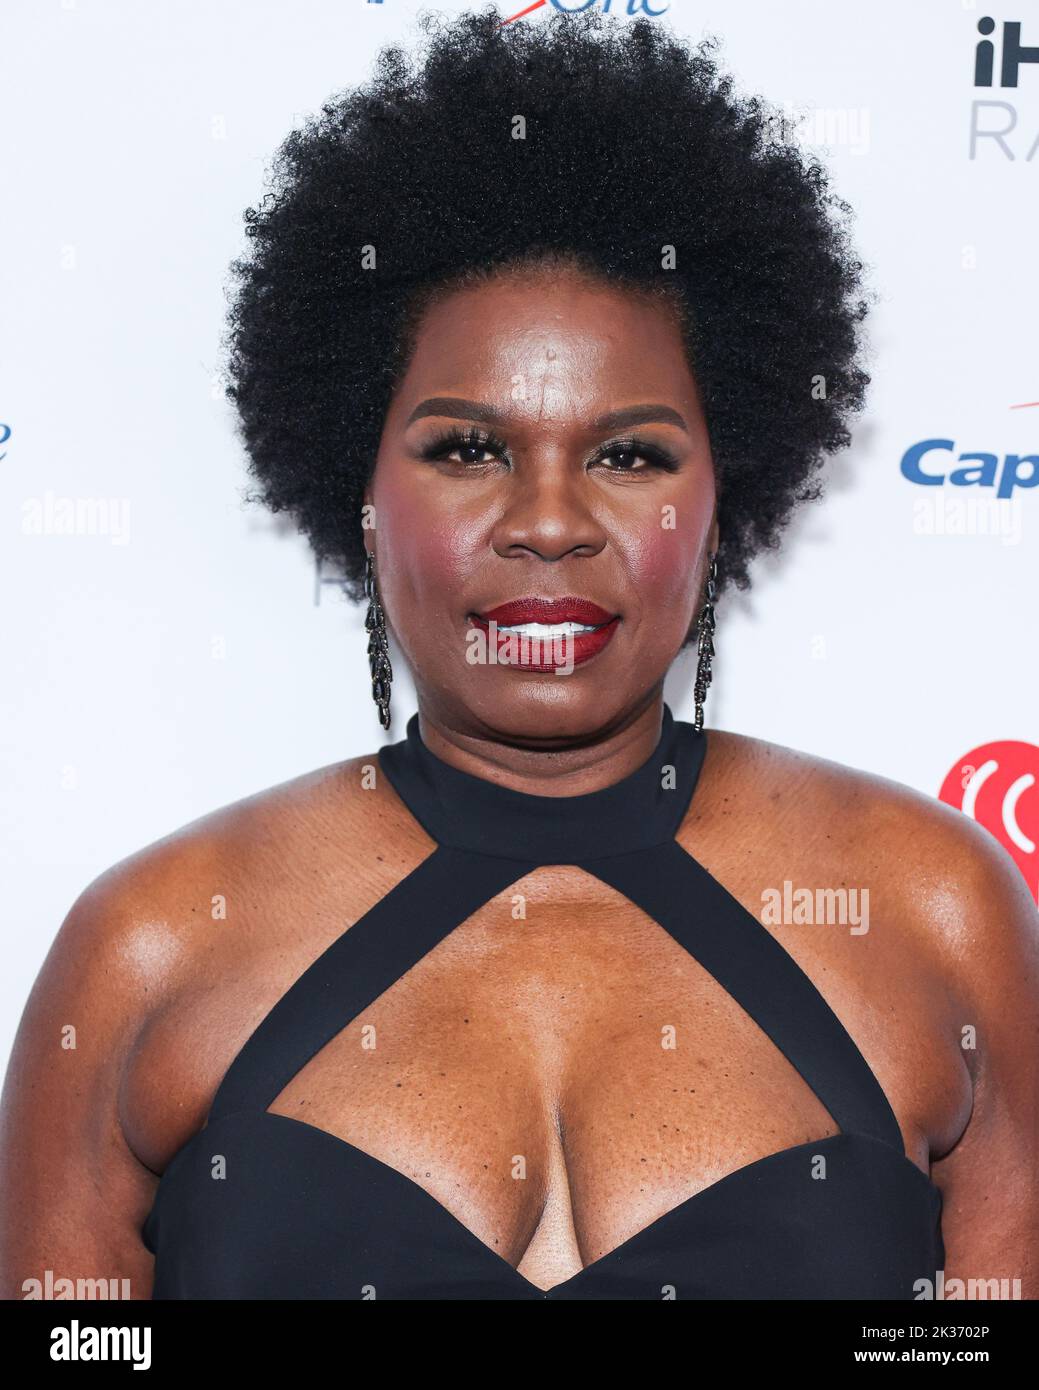 LAS VEGAS, NEVADA, USA - SEPTEMBER 24: Leslie Jones poses in the press room at the 2022 iHeartRadio Music Festival - Night 2 held at the T-Mobile Arena on September 24, 2022 in Las Vegas, Nevada, United States. (Photo by Xavier Collin/Image Press Agency) Stock Photo